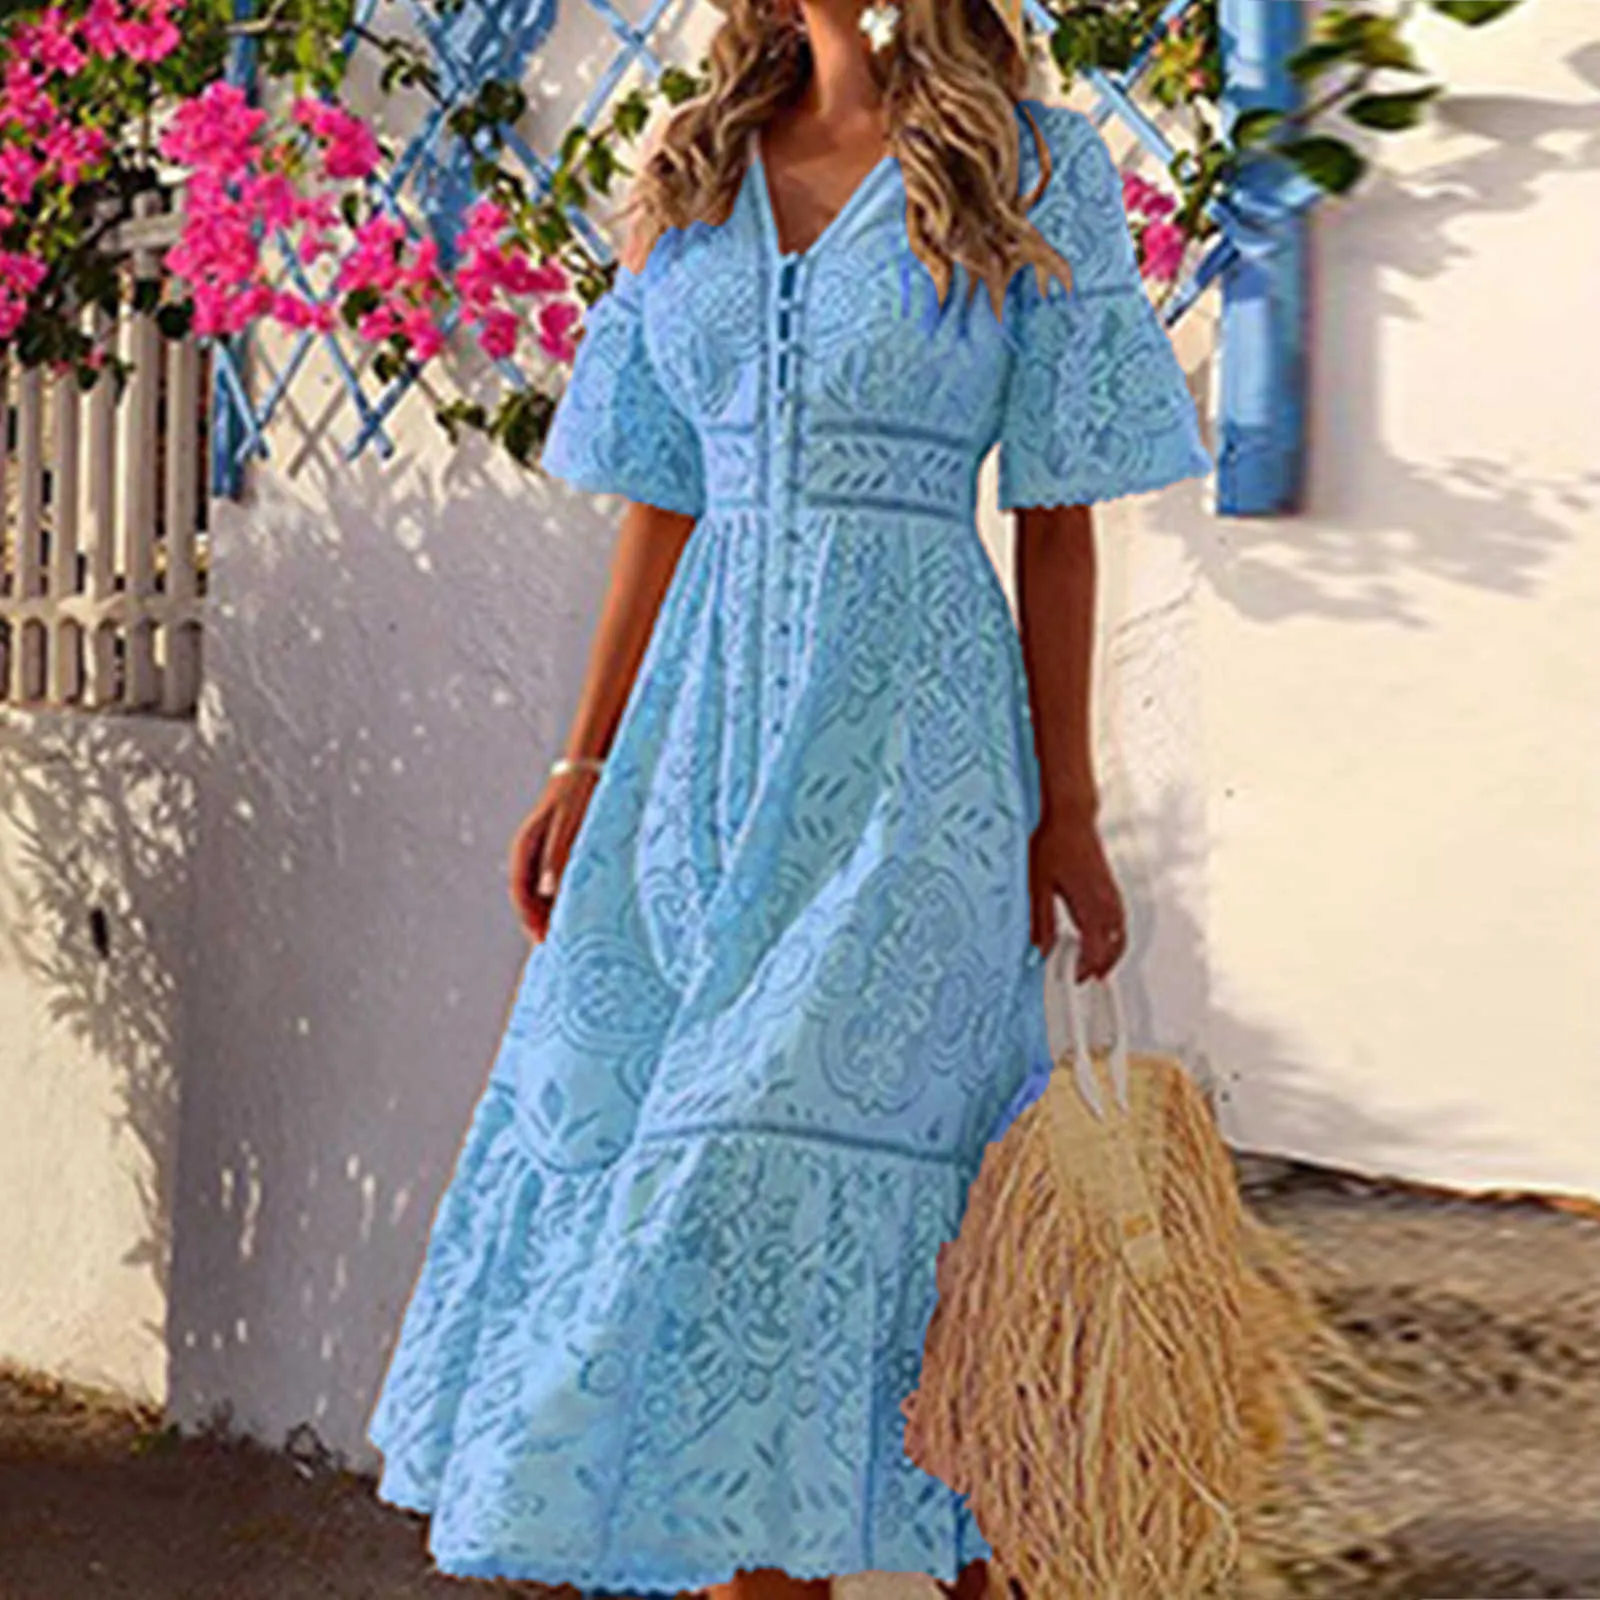 Sexy Bohemian Maxi Dresses For Women Lace Long Sleeve V Neck Boho Swing Dresses Long Cocktail Prom Gown Party Dress Robe Femme Q072713294